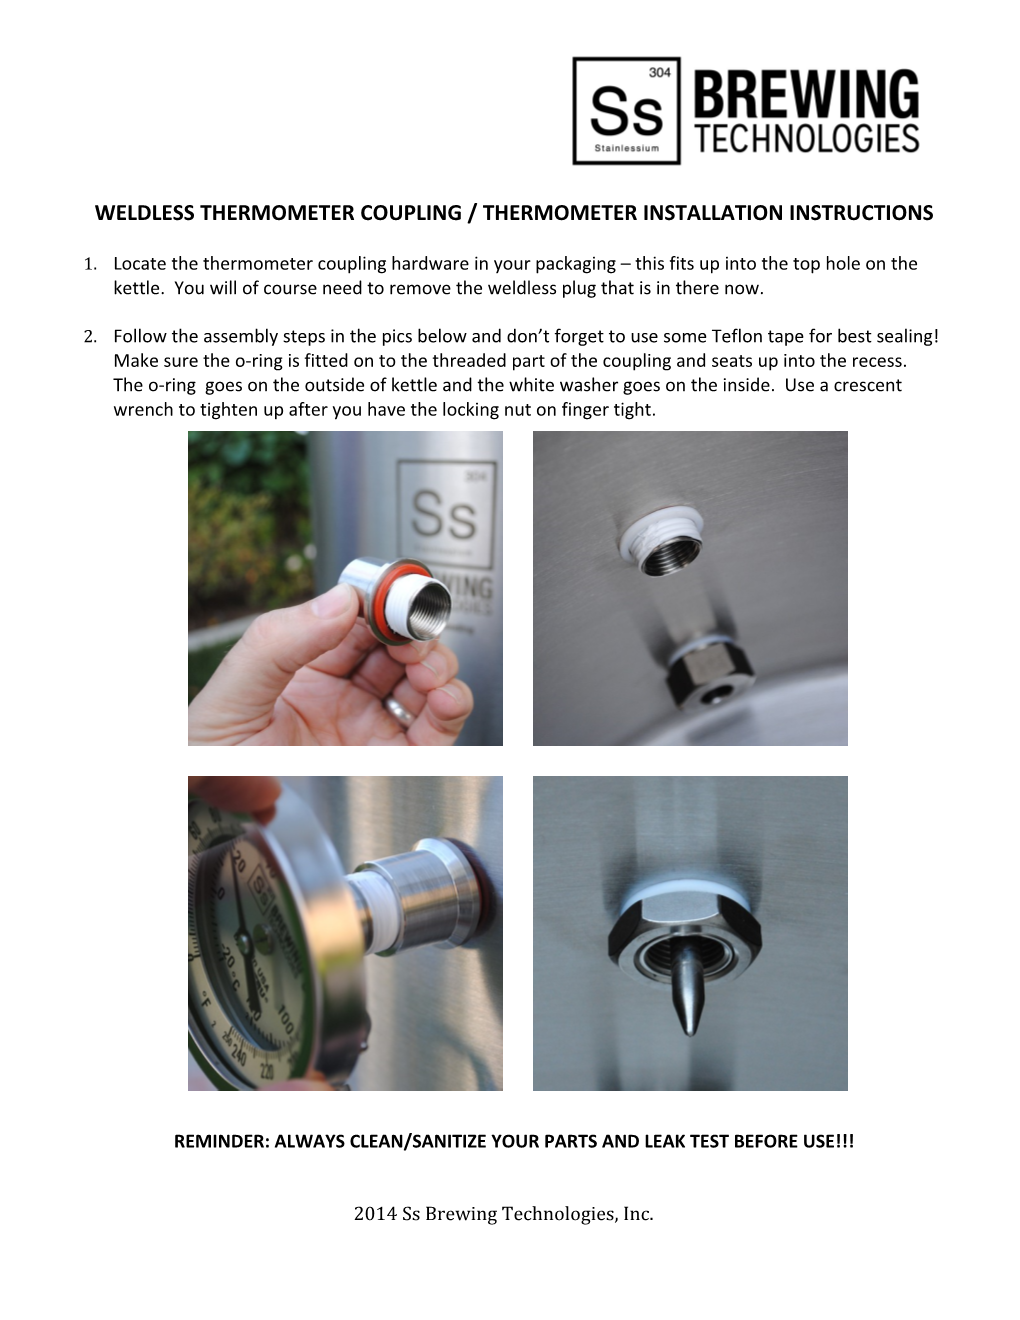 Weldless Thermometer Coupling / Thermometer Installation Instructions